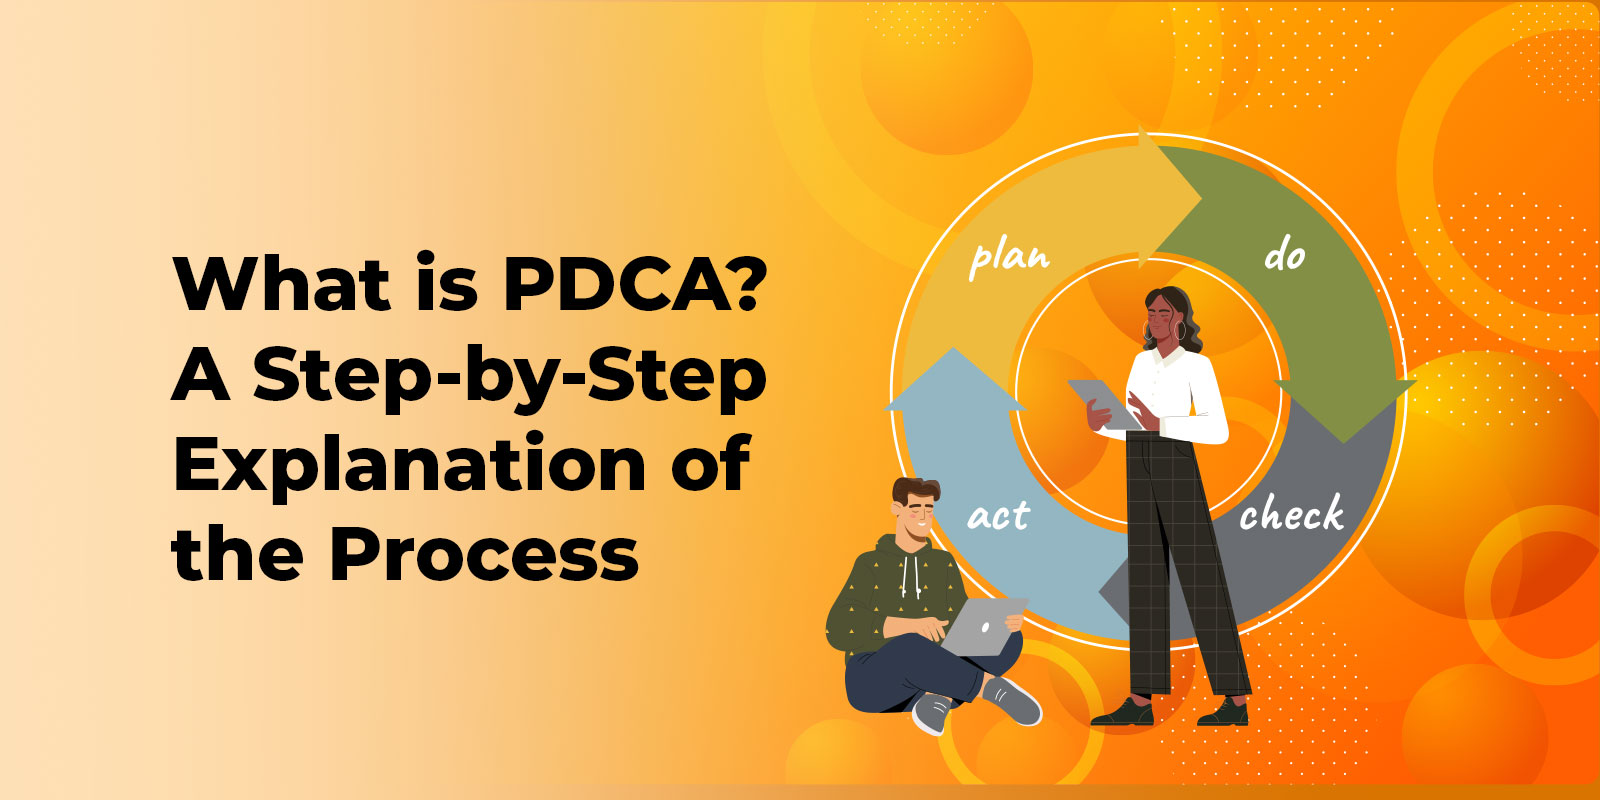 What is PDCA? – A Step-by-Step Explanation of the Process